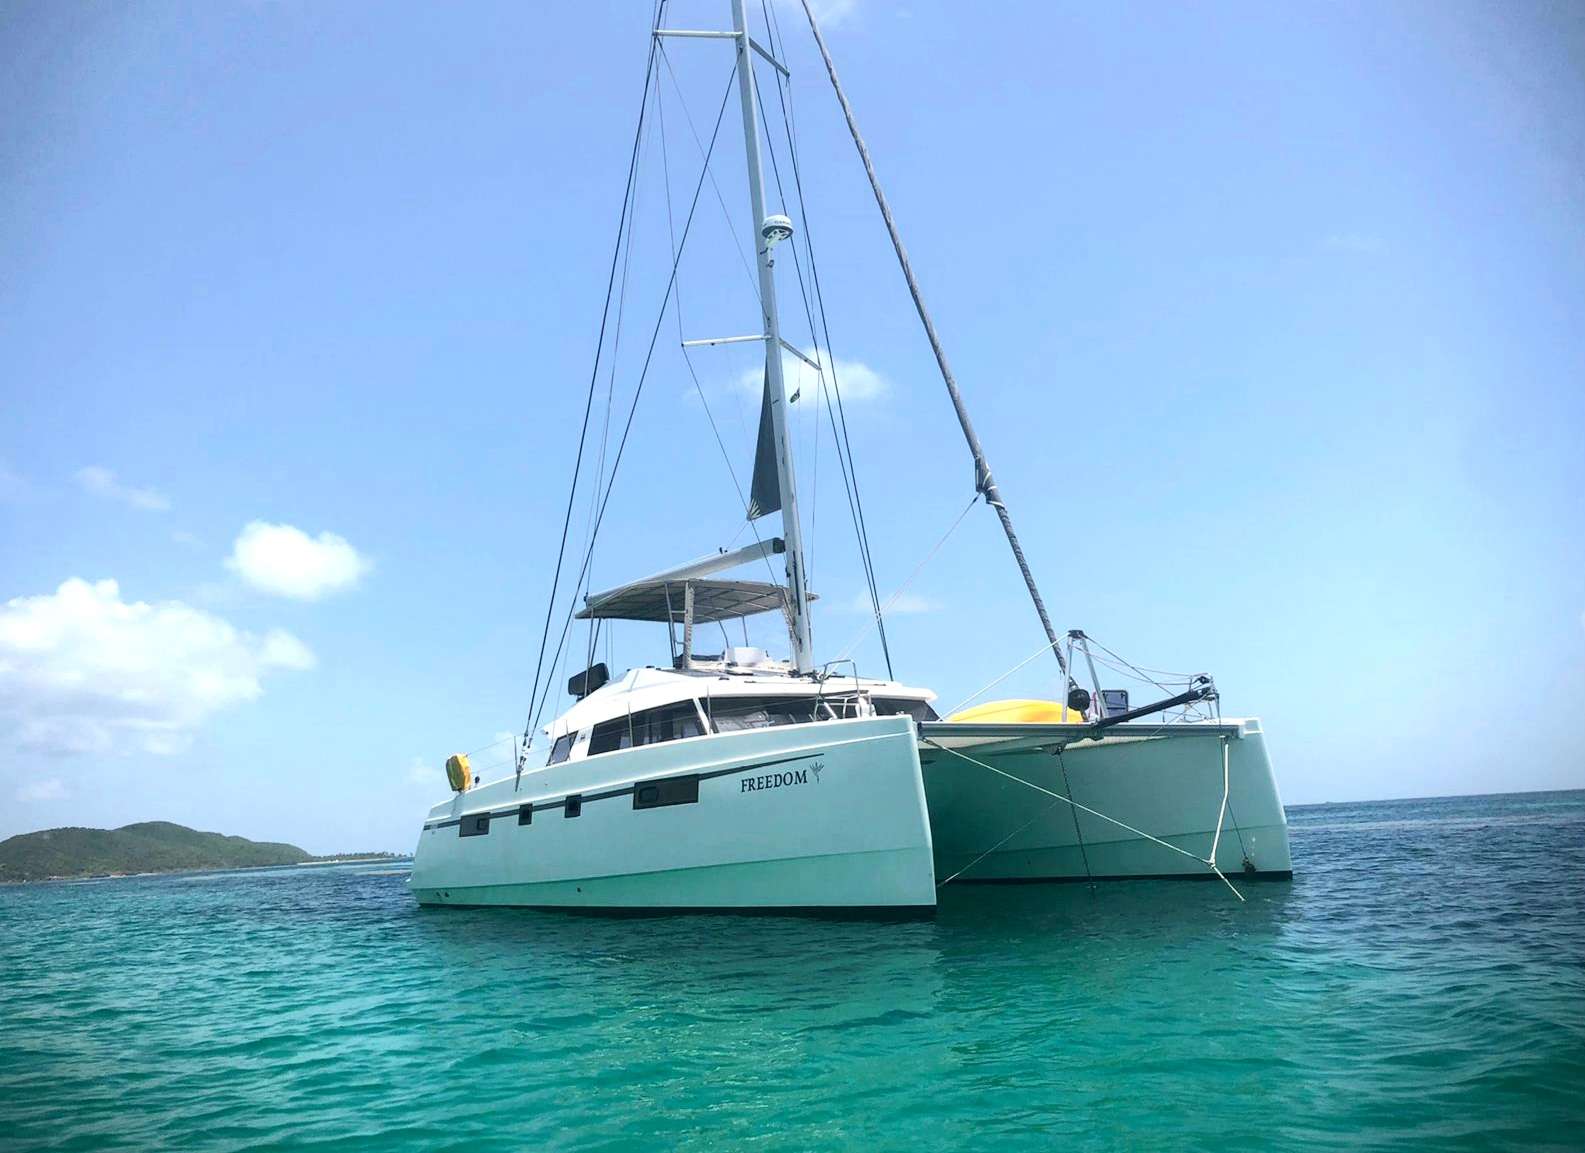 Freedom - Yacht Charter Netherlands Antilles & Boat hire in Caribbean 1